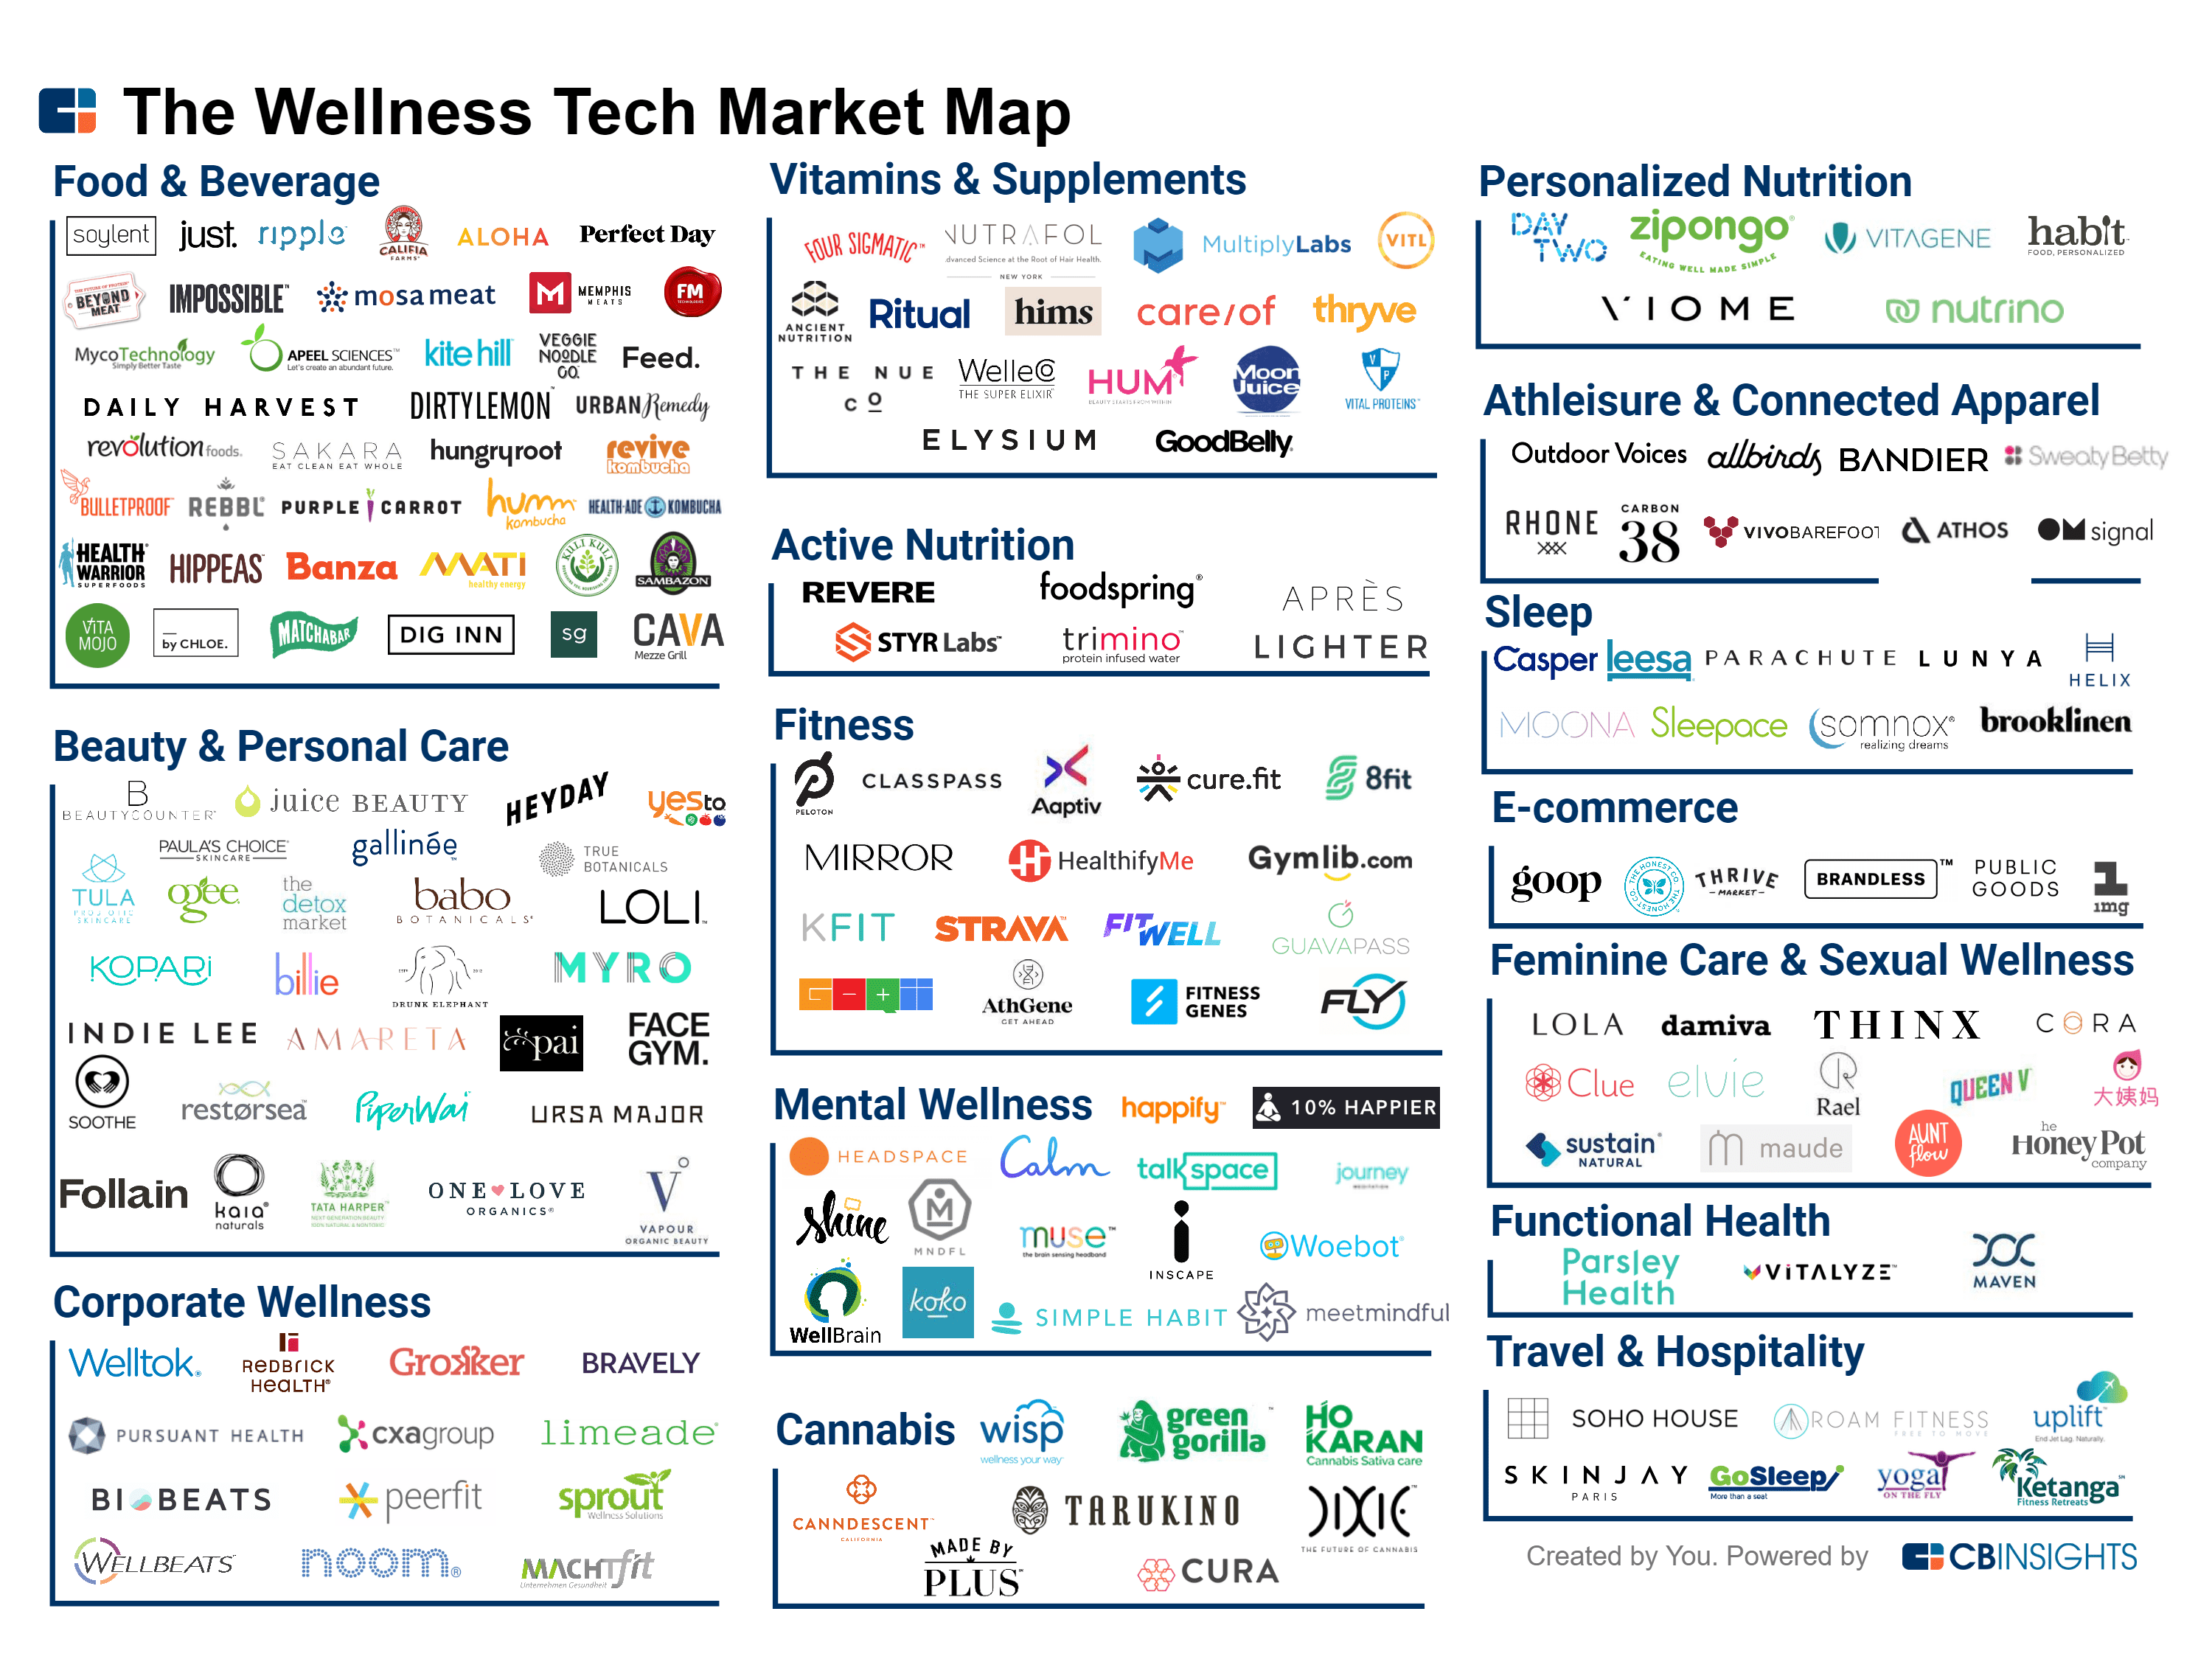 150 Fitness & Wellness Startups Cultivating the Wellness Industry